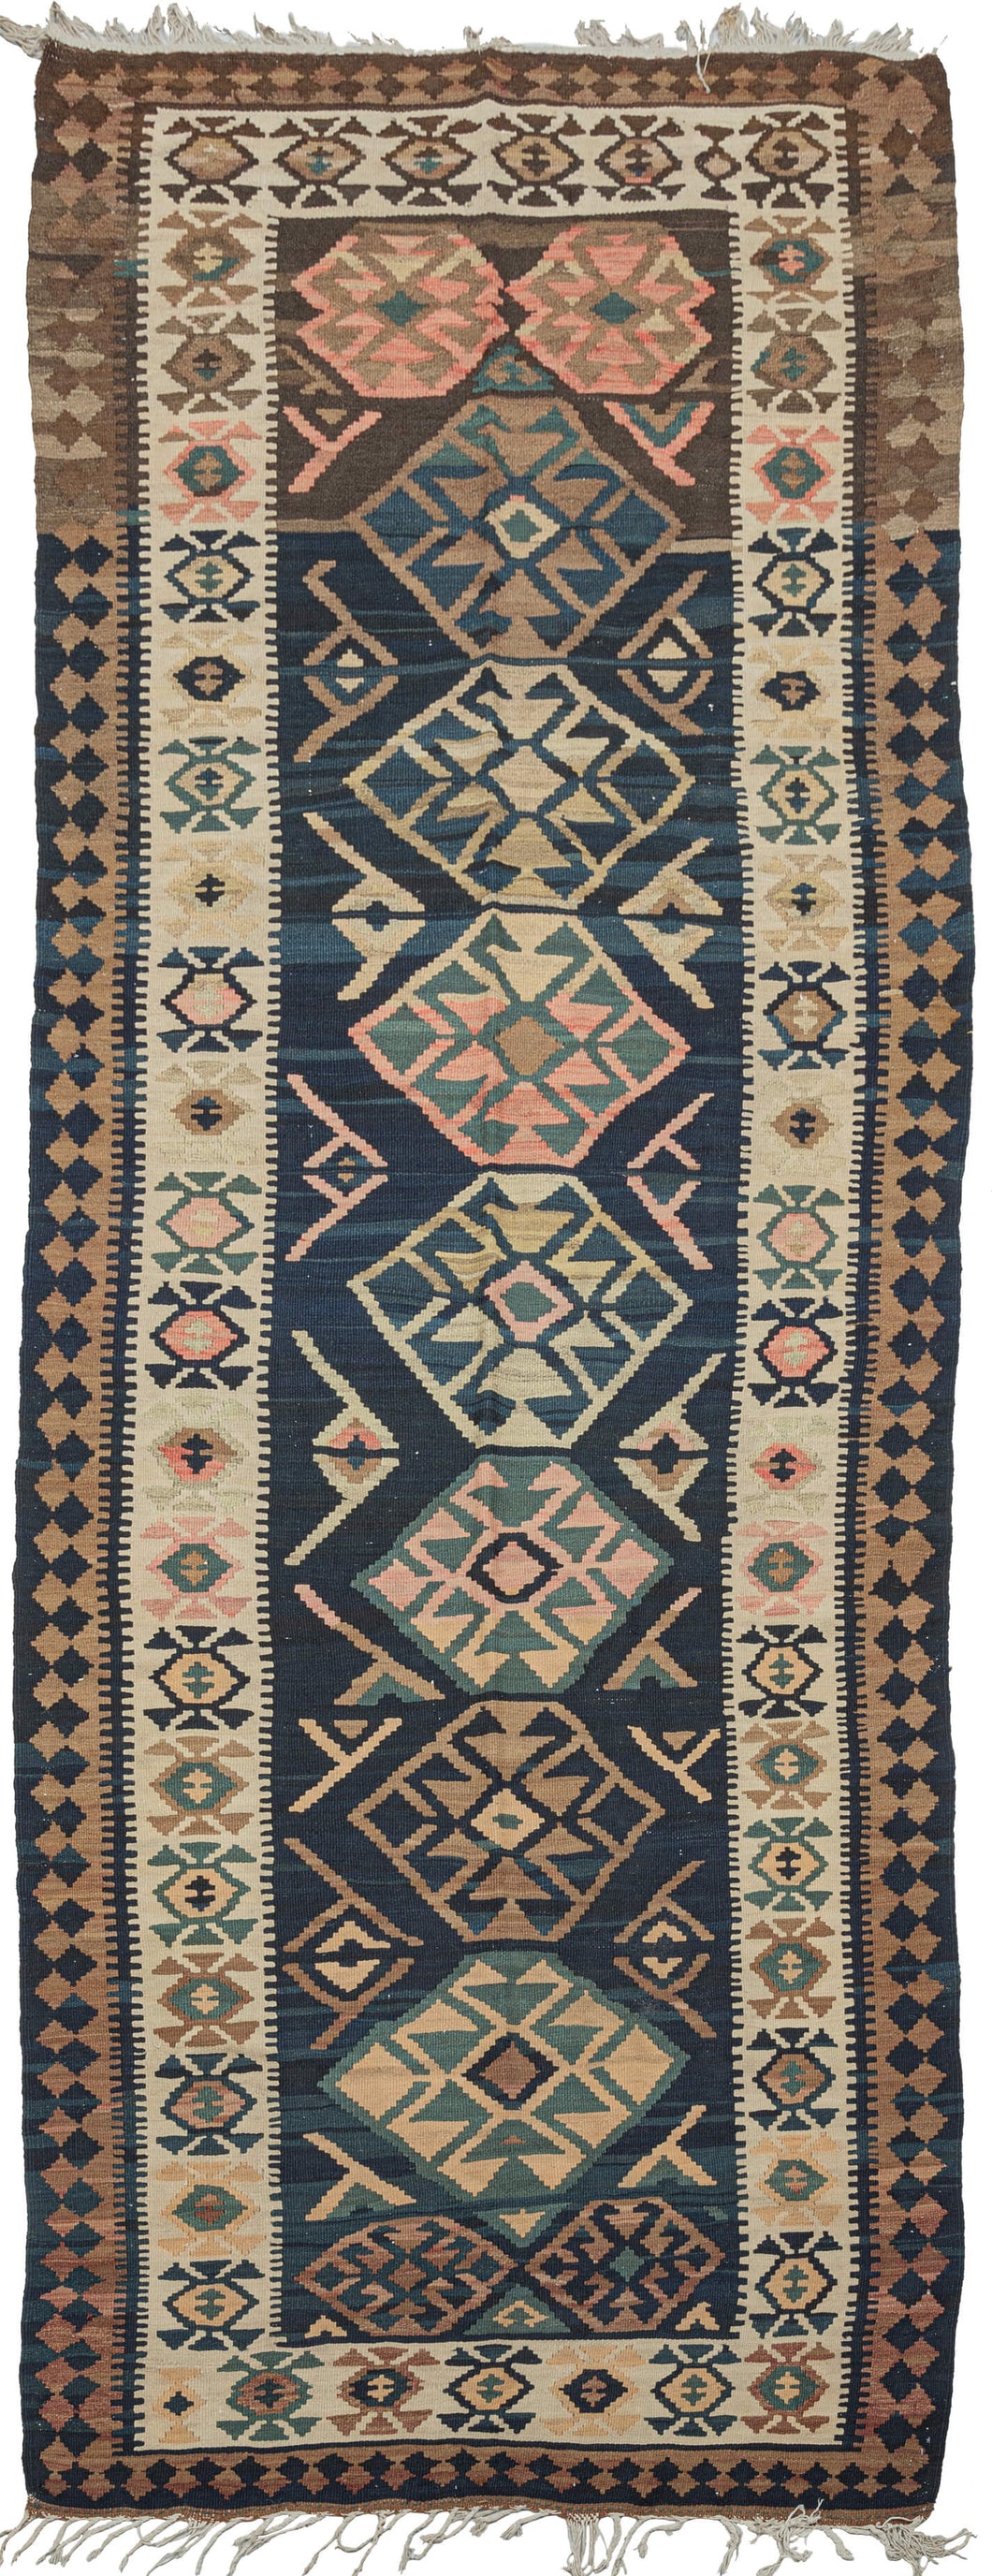 kelleghi kilim runner featuring a stunning indigo blue field, with a bold geometric design of medallions and line shapes. Soft browns, ivories and watermelon complete the color palette.